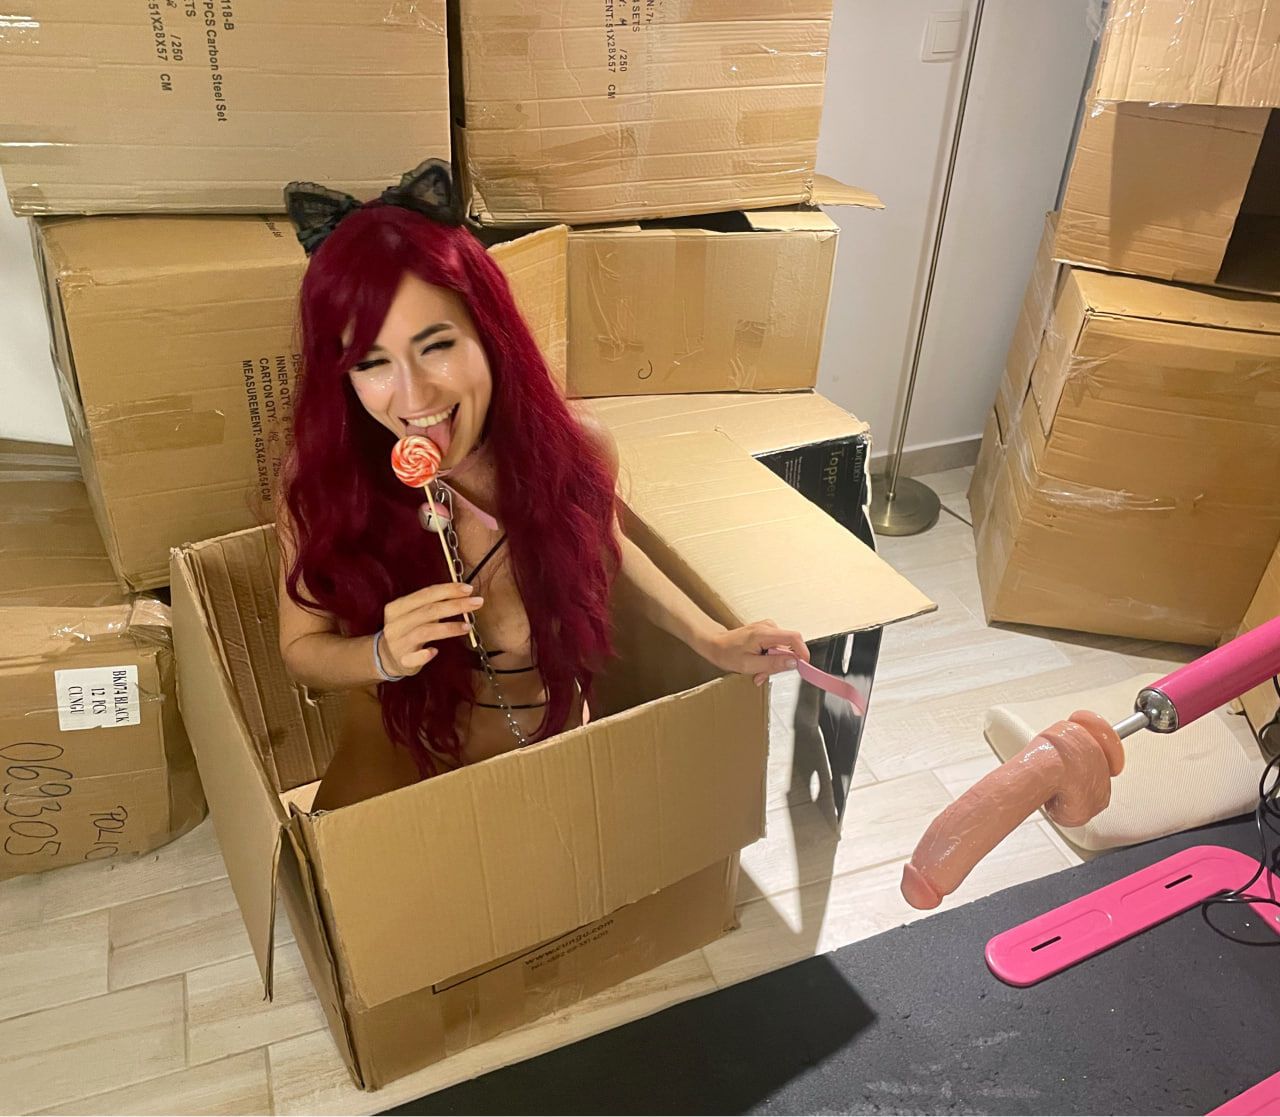 Fetish sex out of the box #5